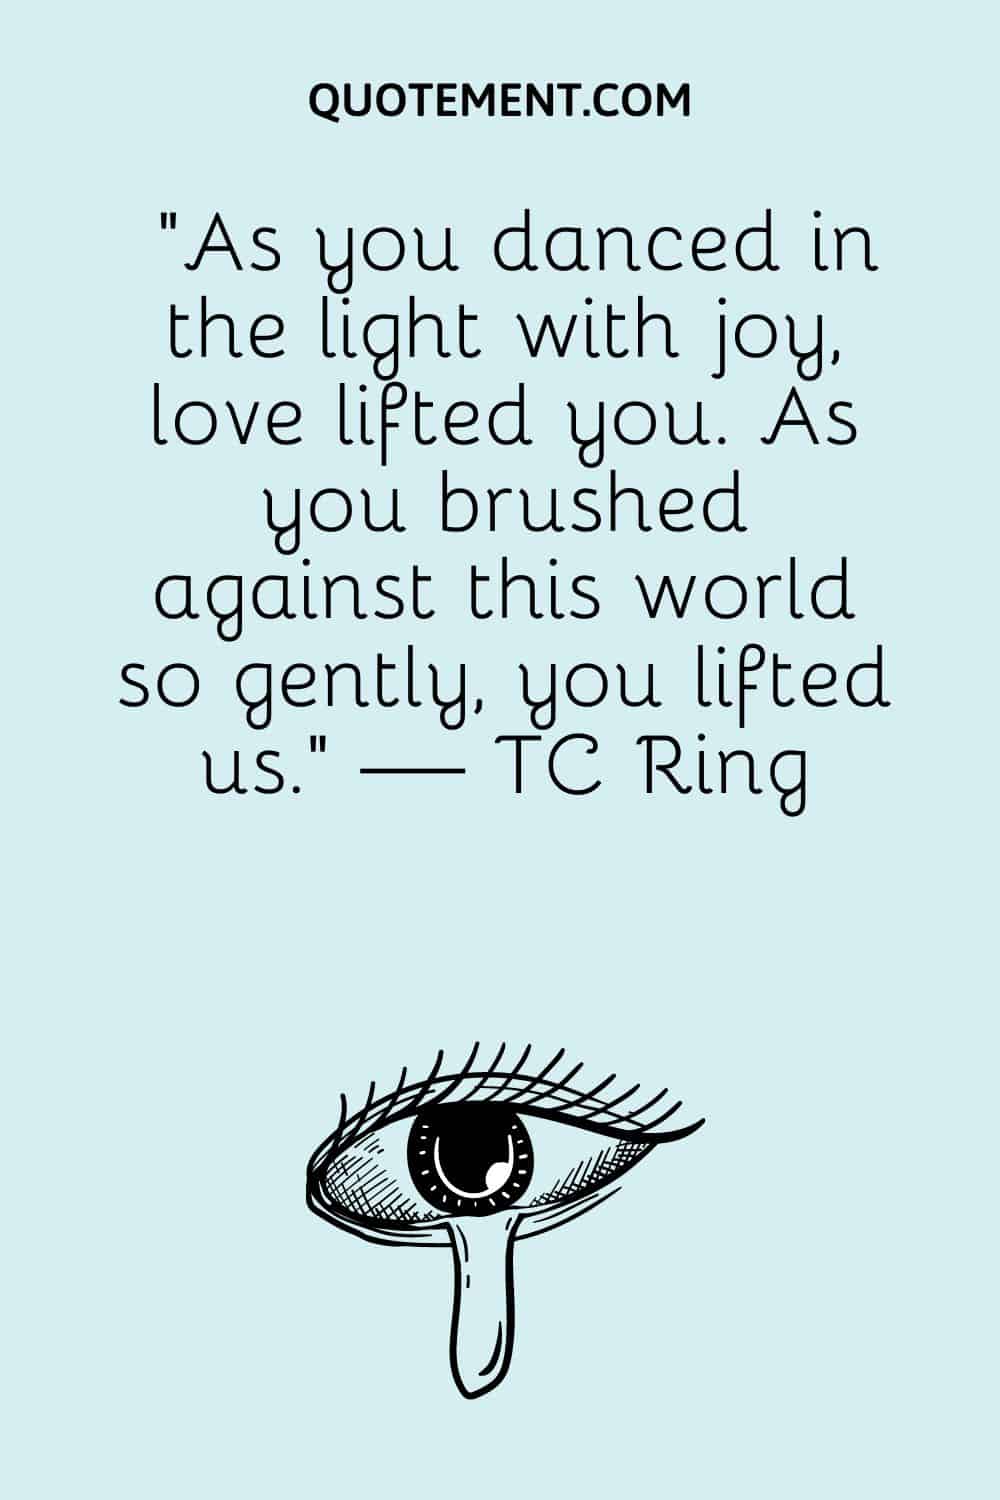 “As you danced in the light with joy, love lifted you. As you brushed against this world so gently, you lifted us.” — TC Ring